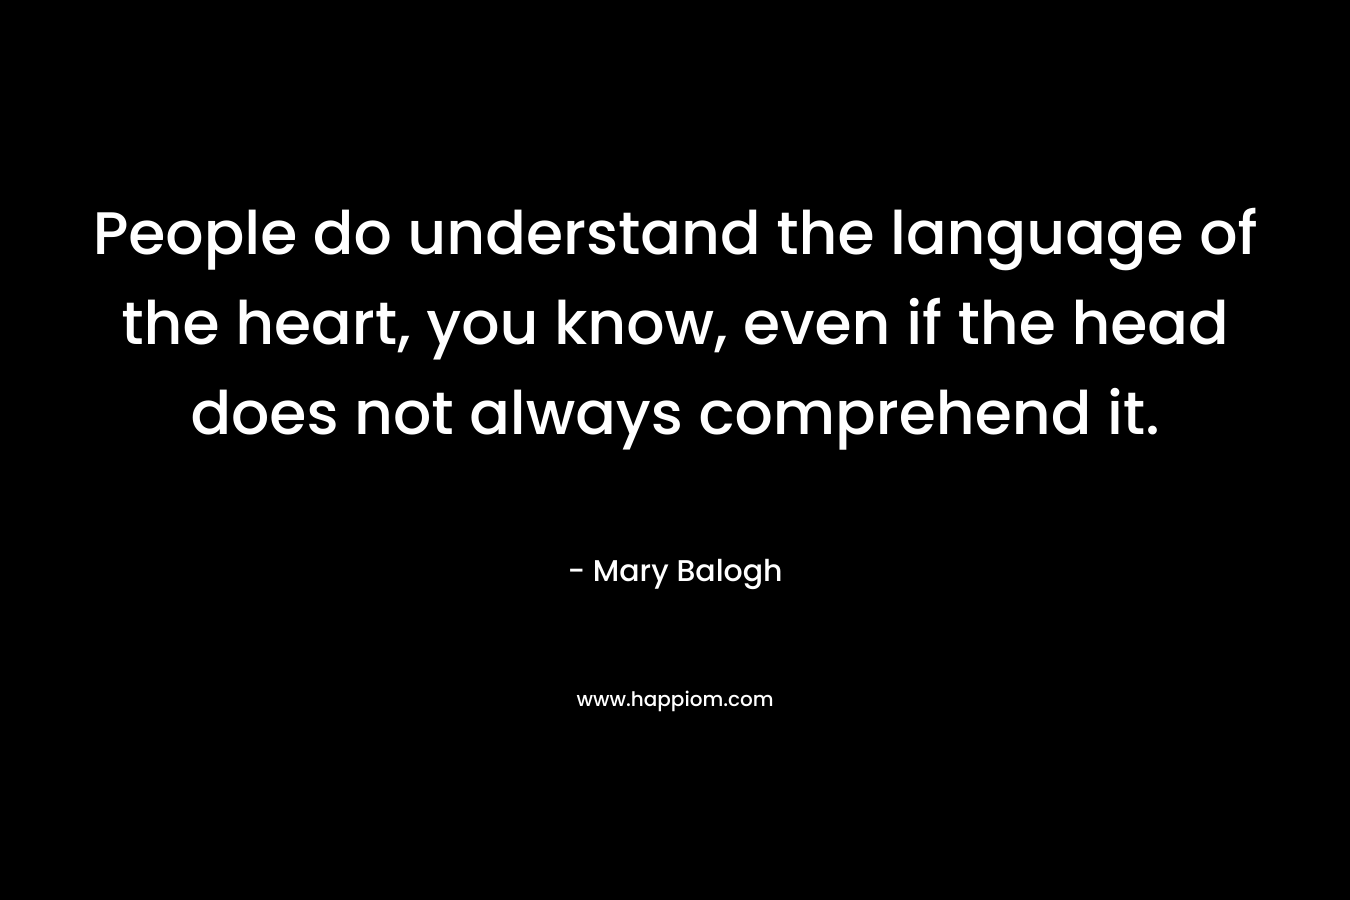 People do understand the language of the heart, you know, even if the head does not always comprehend it.